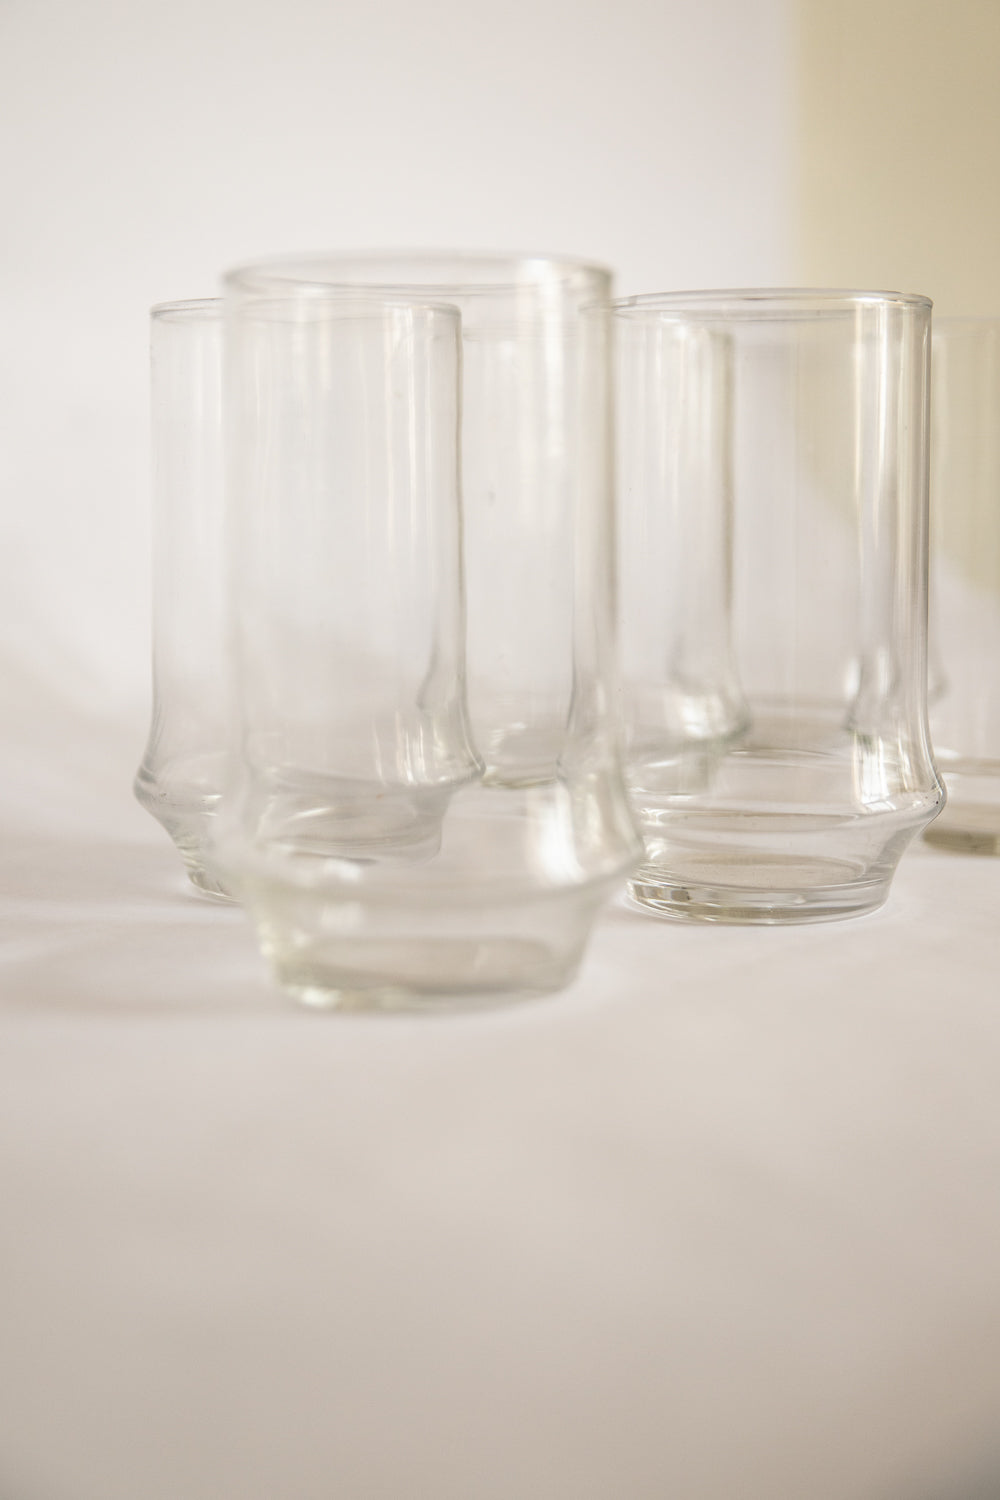 Set of 6 Libbey Drinking Glasses